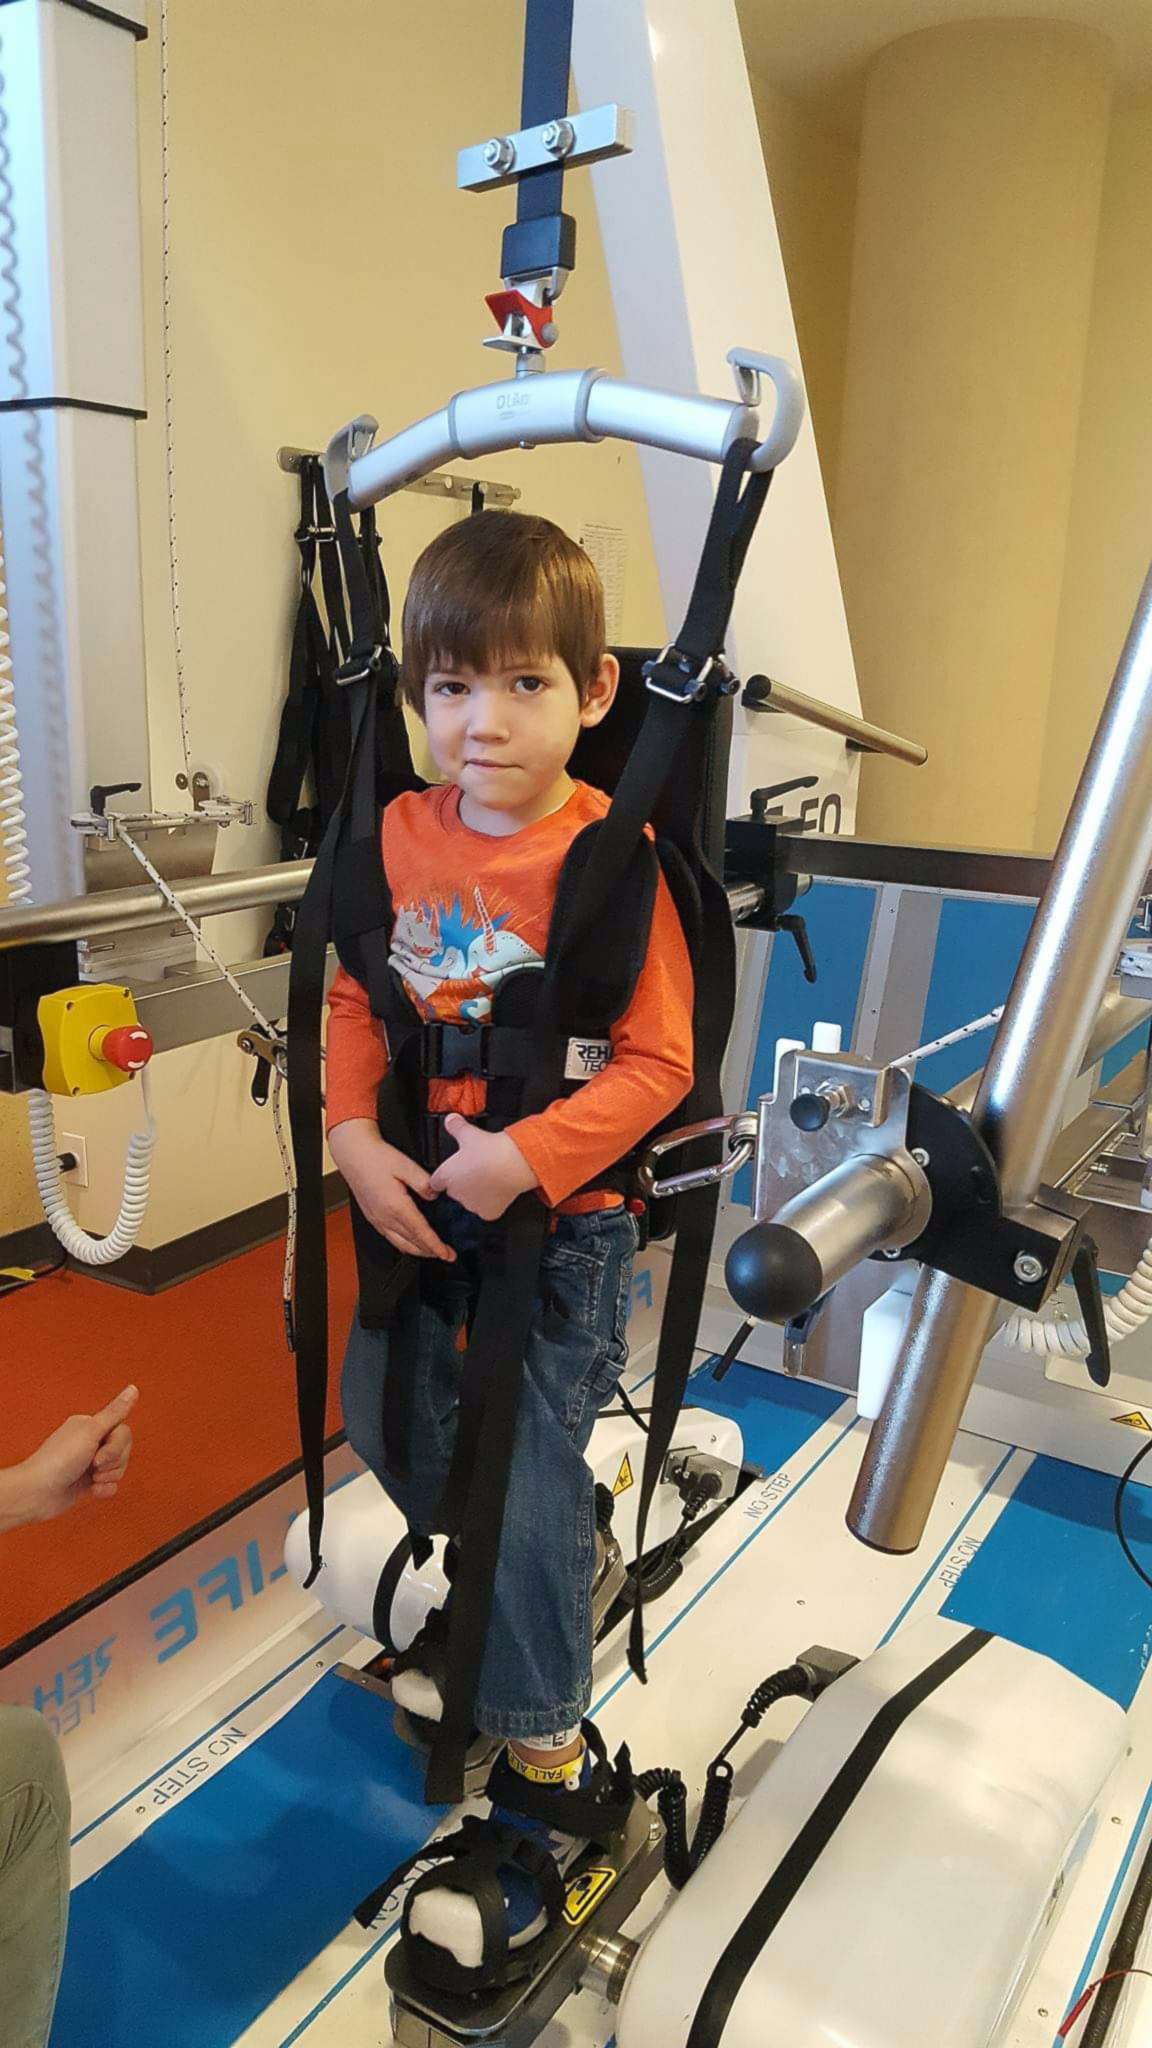 PHOTO: Joey Wilcox receives inpatient care at Kennedy Krieger Institute in Baltimore, where he is going extensive physical therapy to improve mobility after he started showing signs of AFM in September 2018.